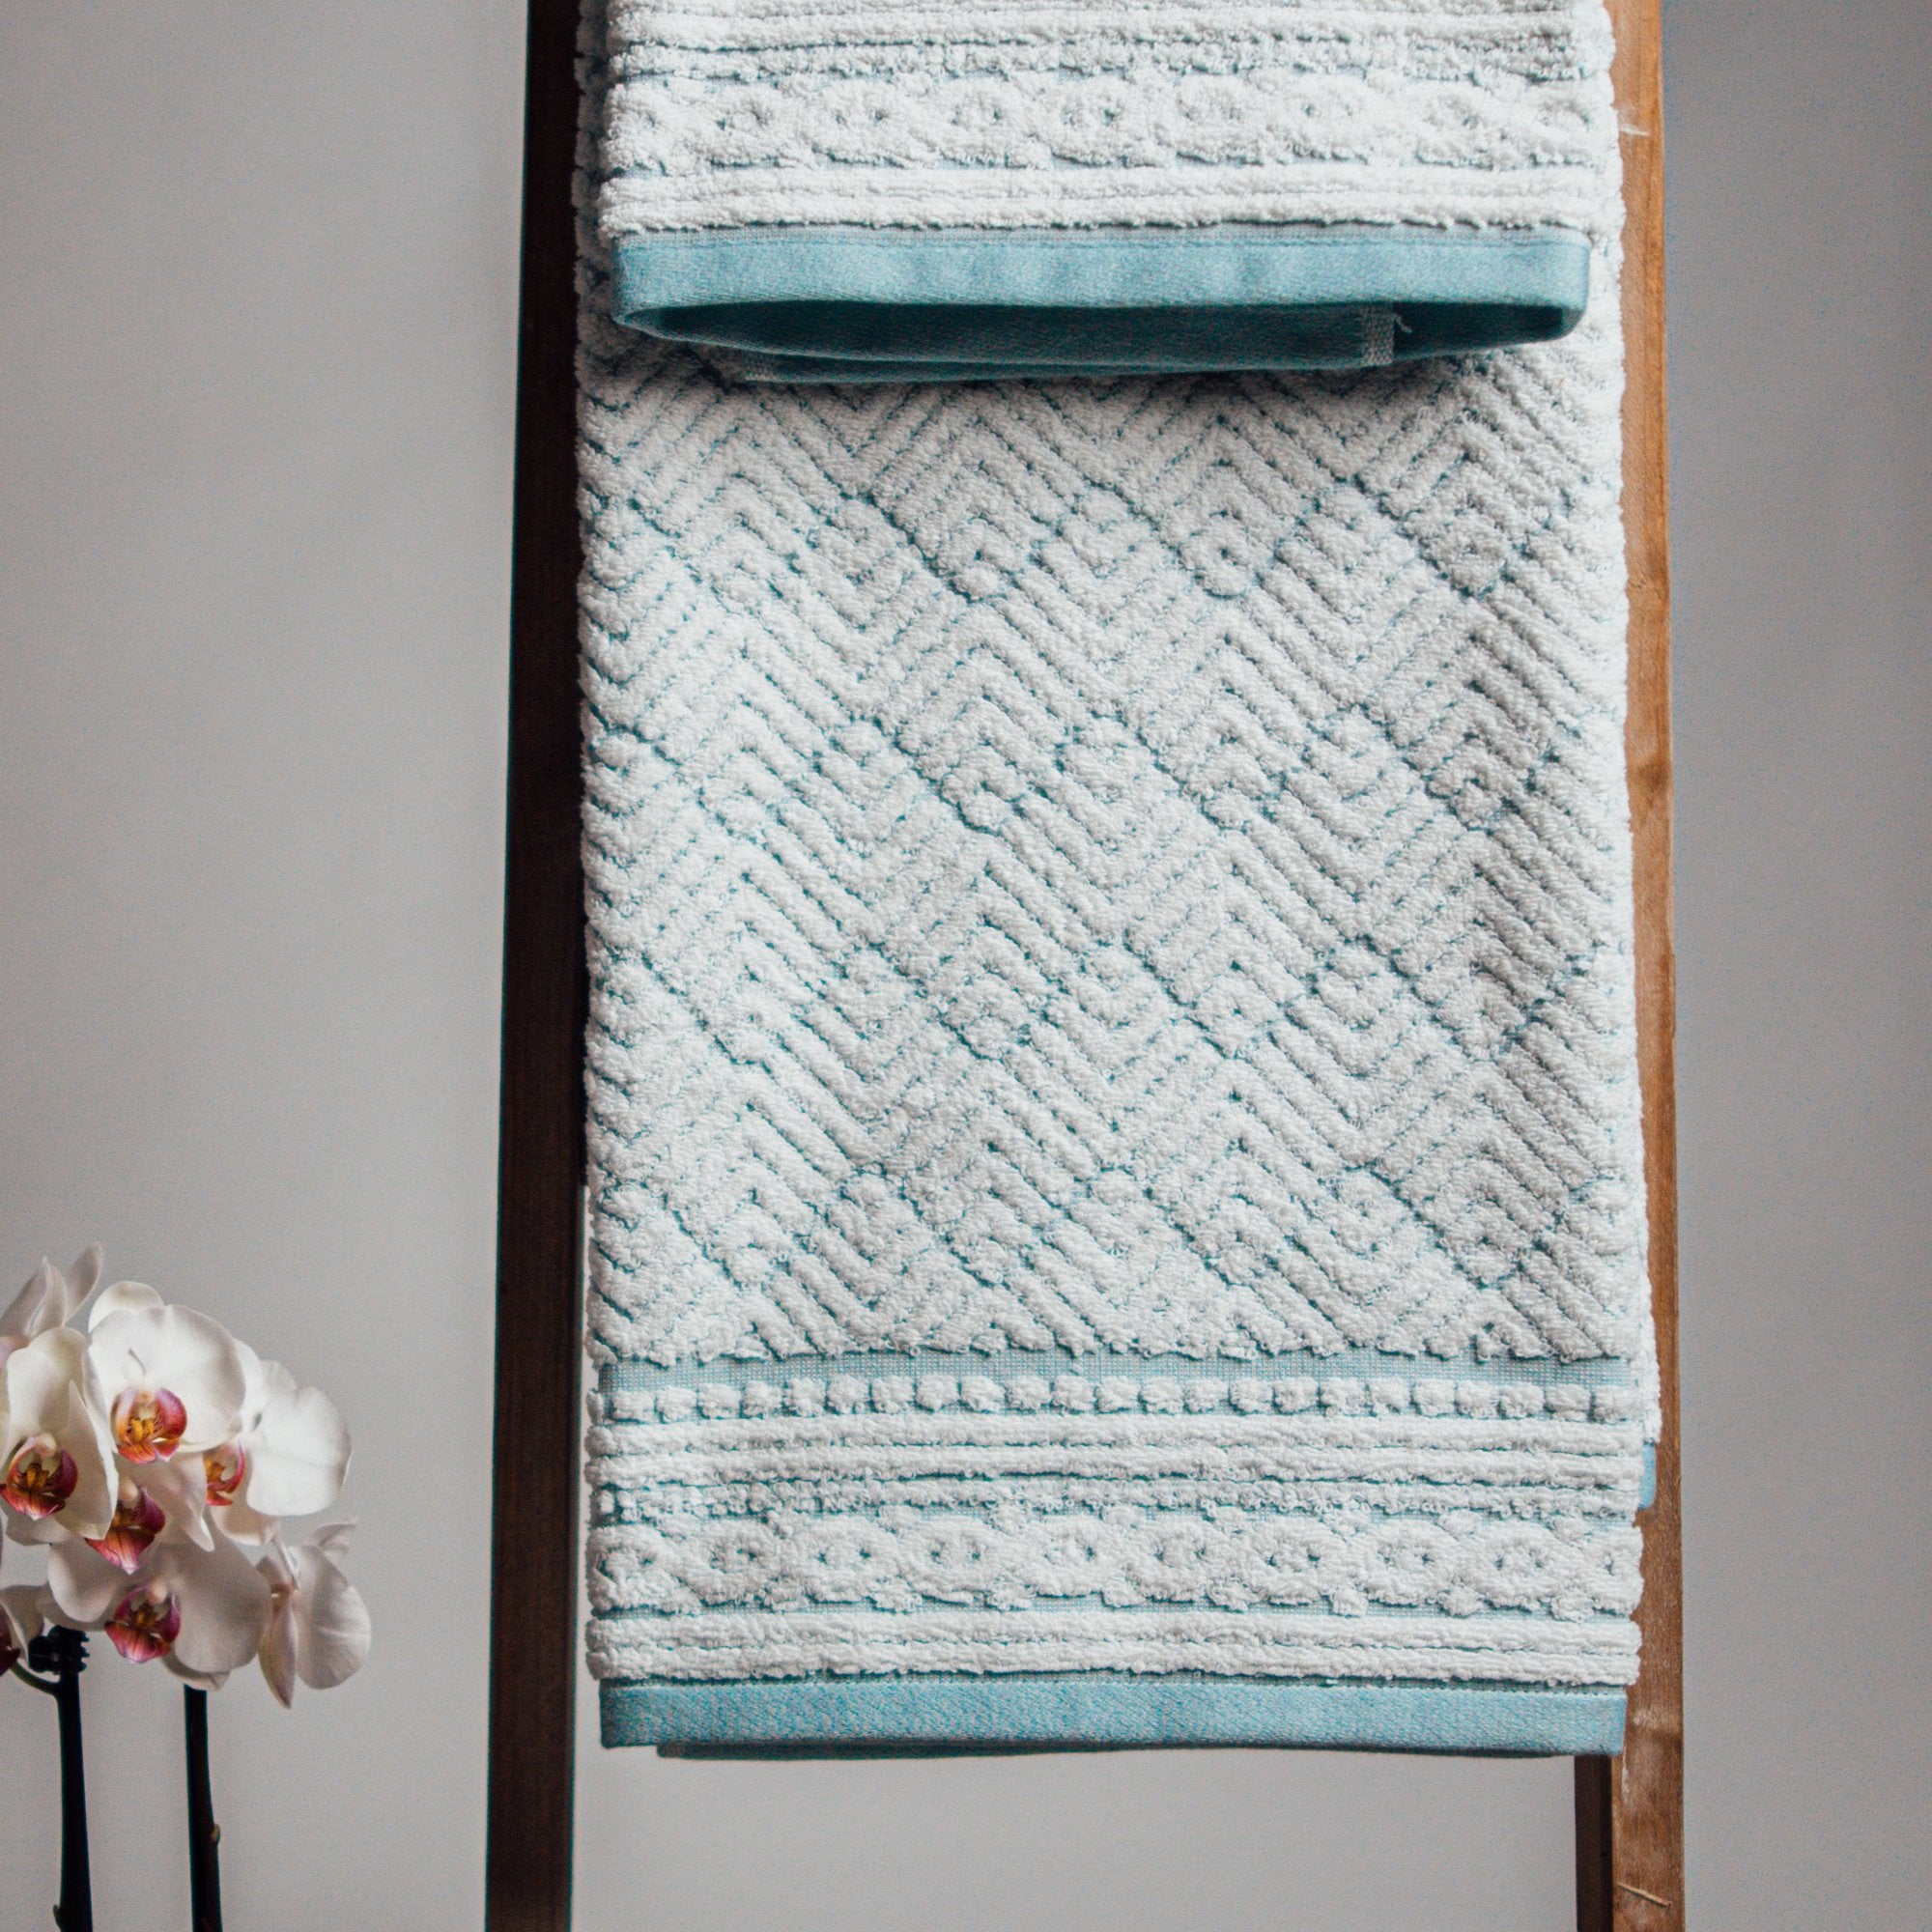 Eco-Friendly Sustainable Bath Towels by Grund > Organic Cotton